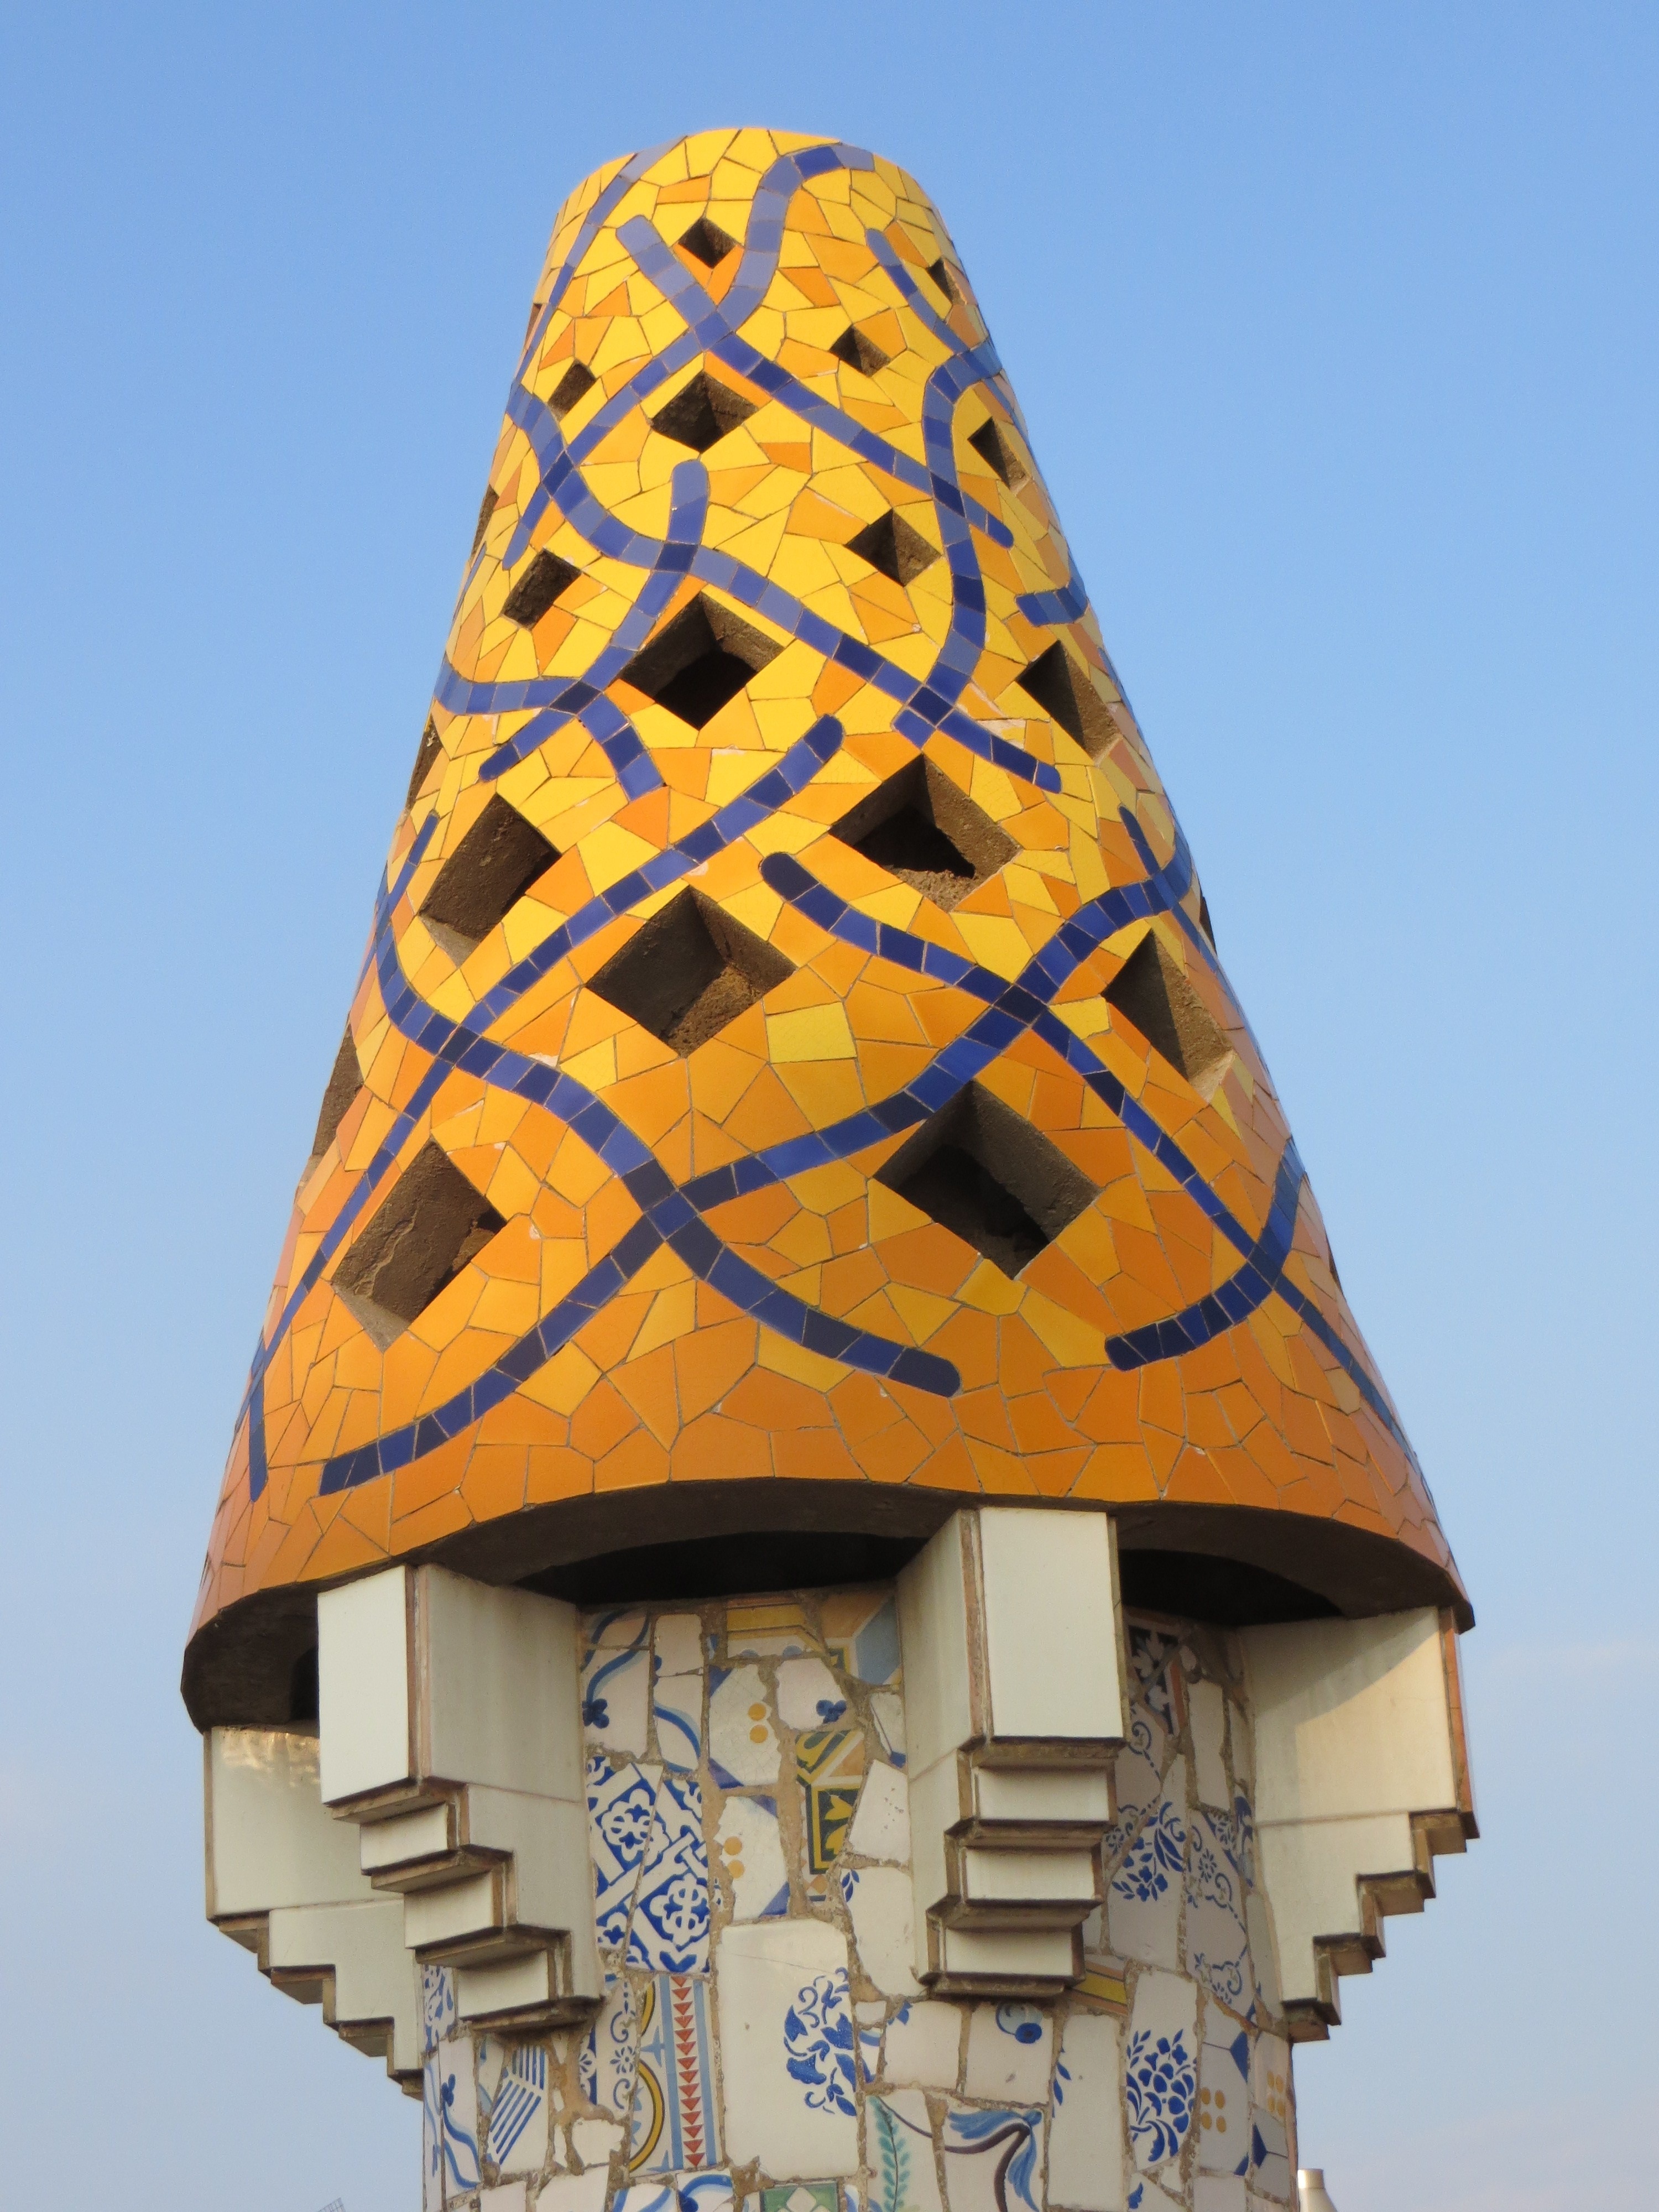 yellow and orange concrete tiled surface tower